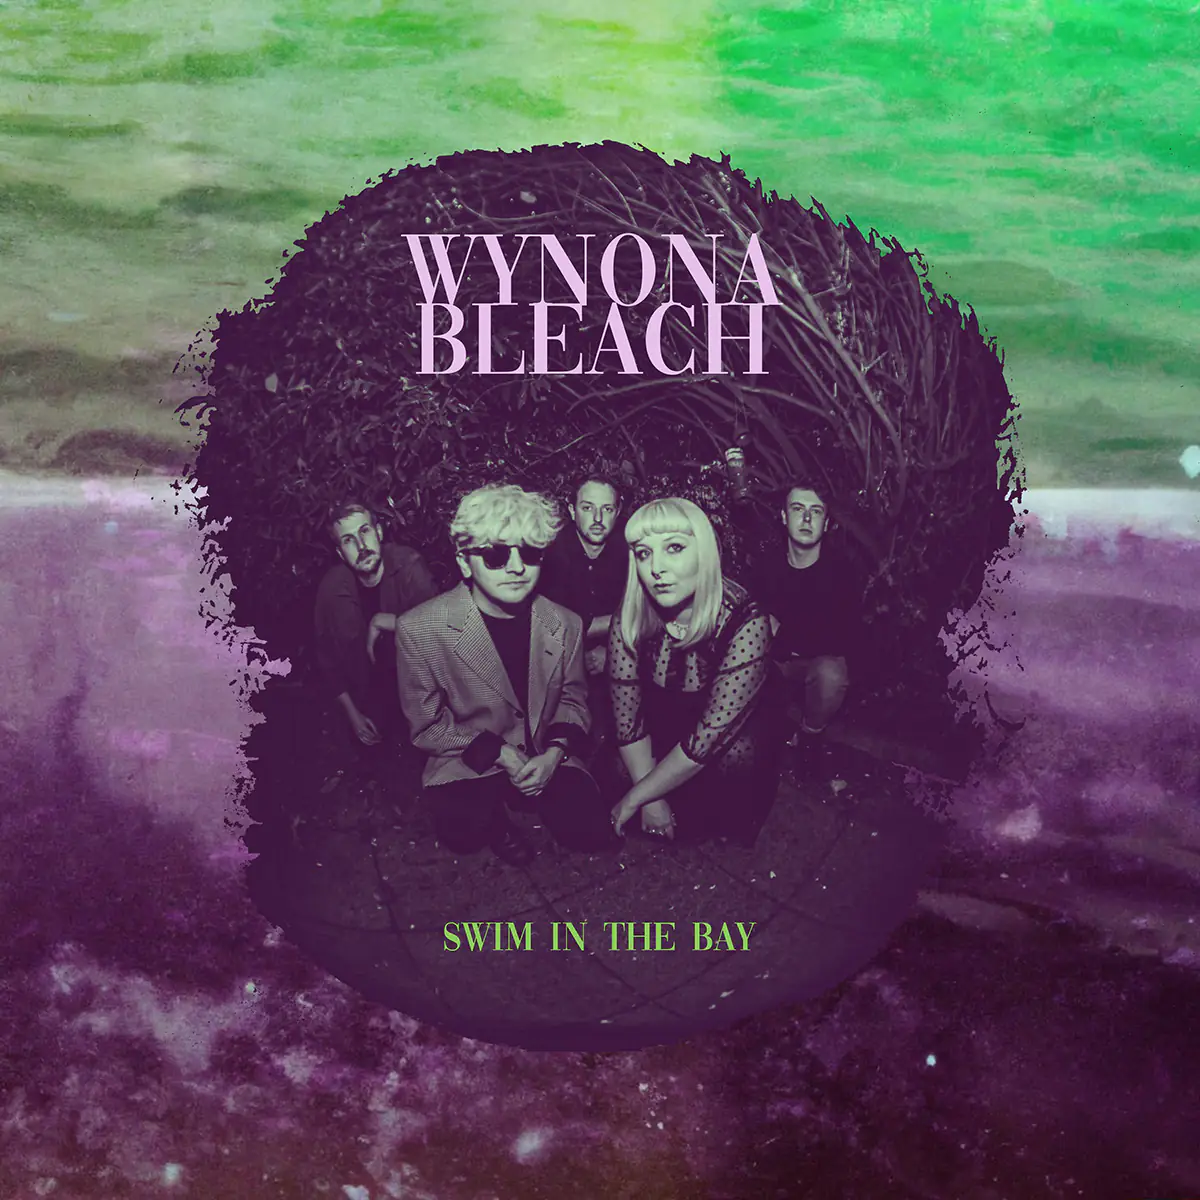 WYNONA BLEACH announce their forthcoming single ‘Swim In The Bay’ – out January 24th